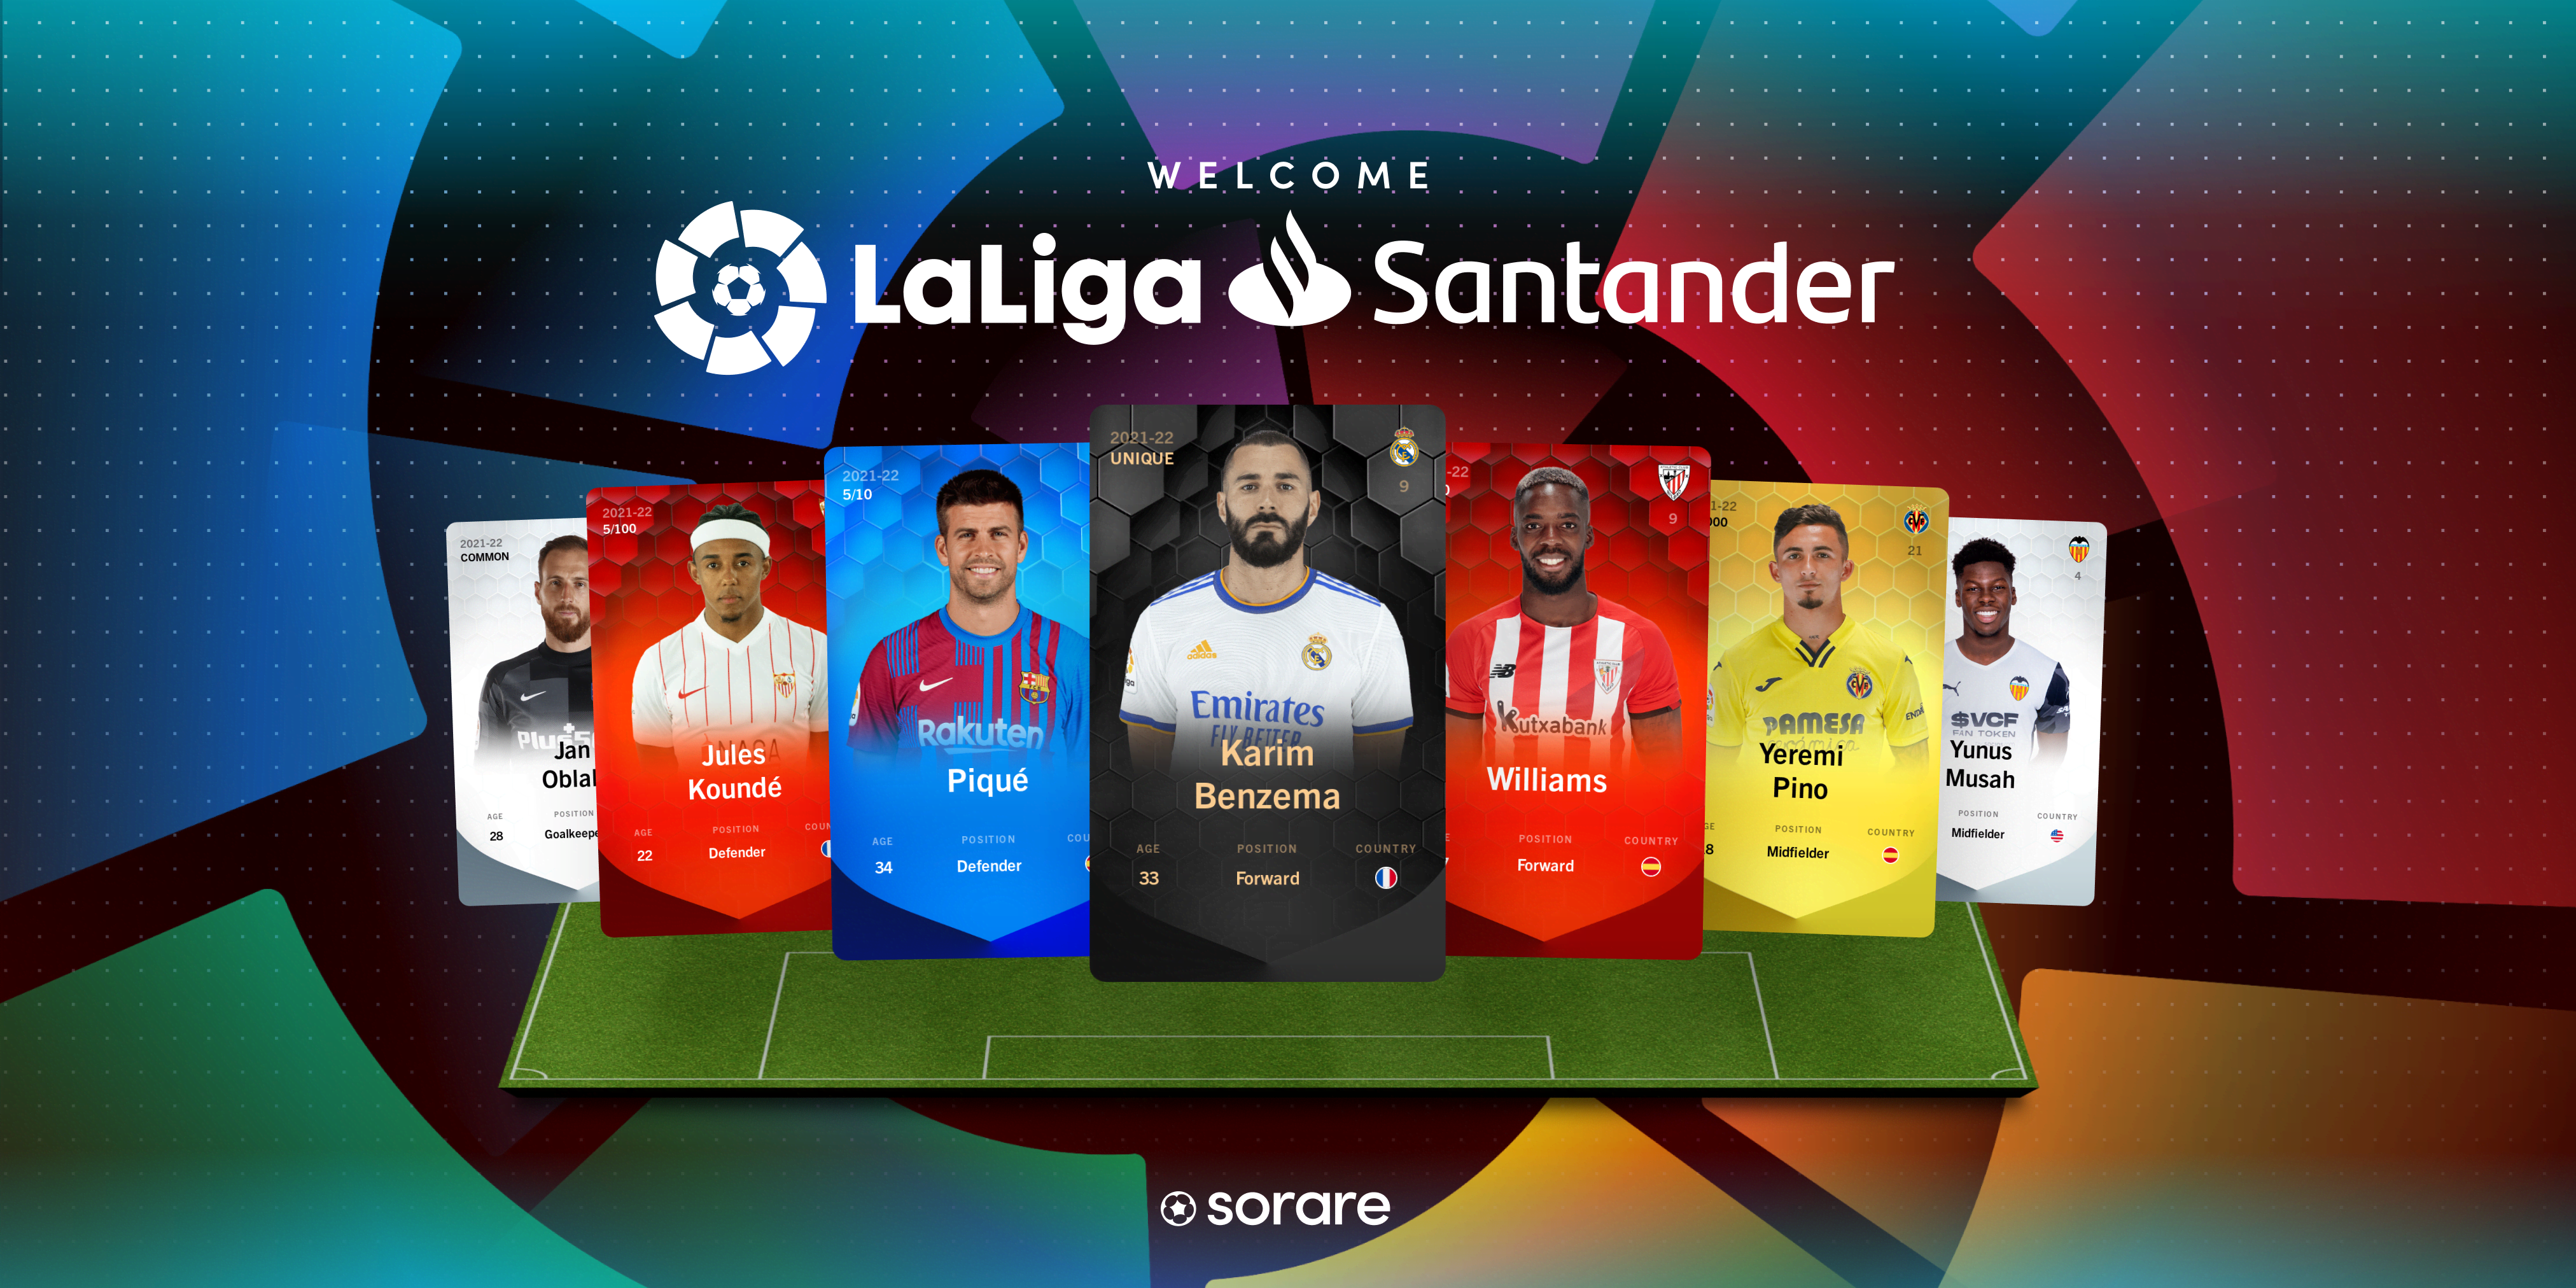 Spain’s top soccer league is launching NFT fantasy football cards for all its players